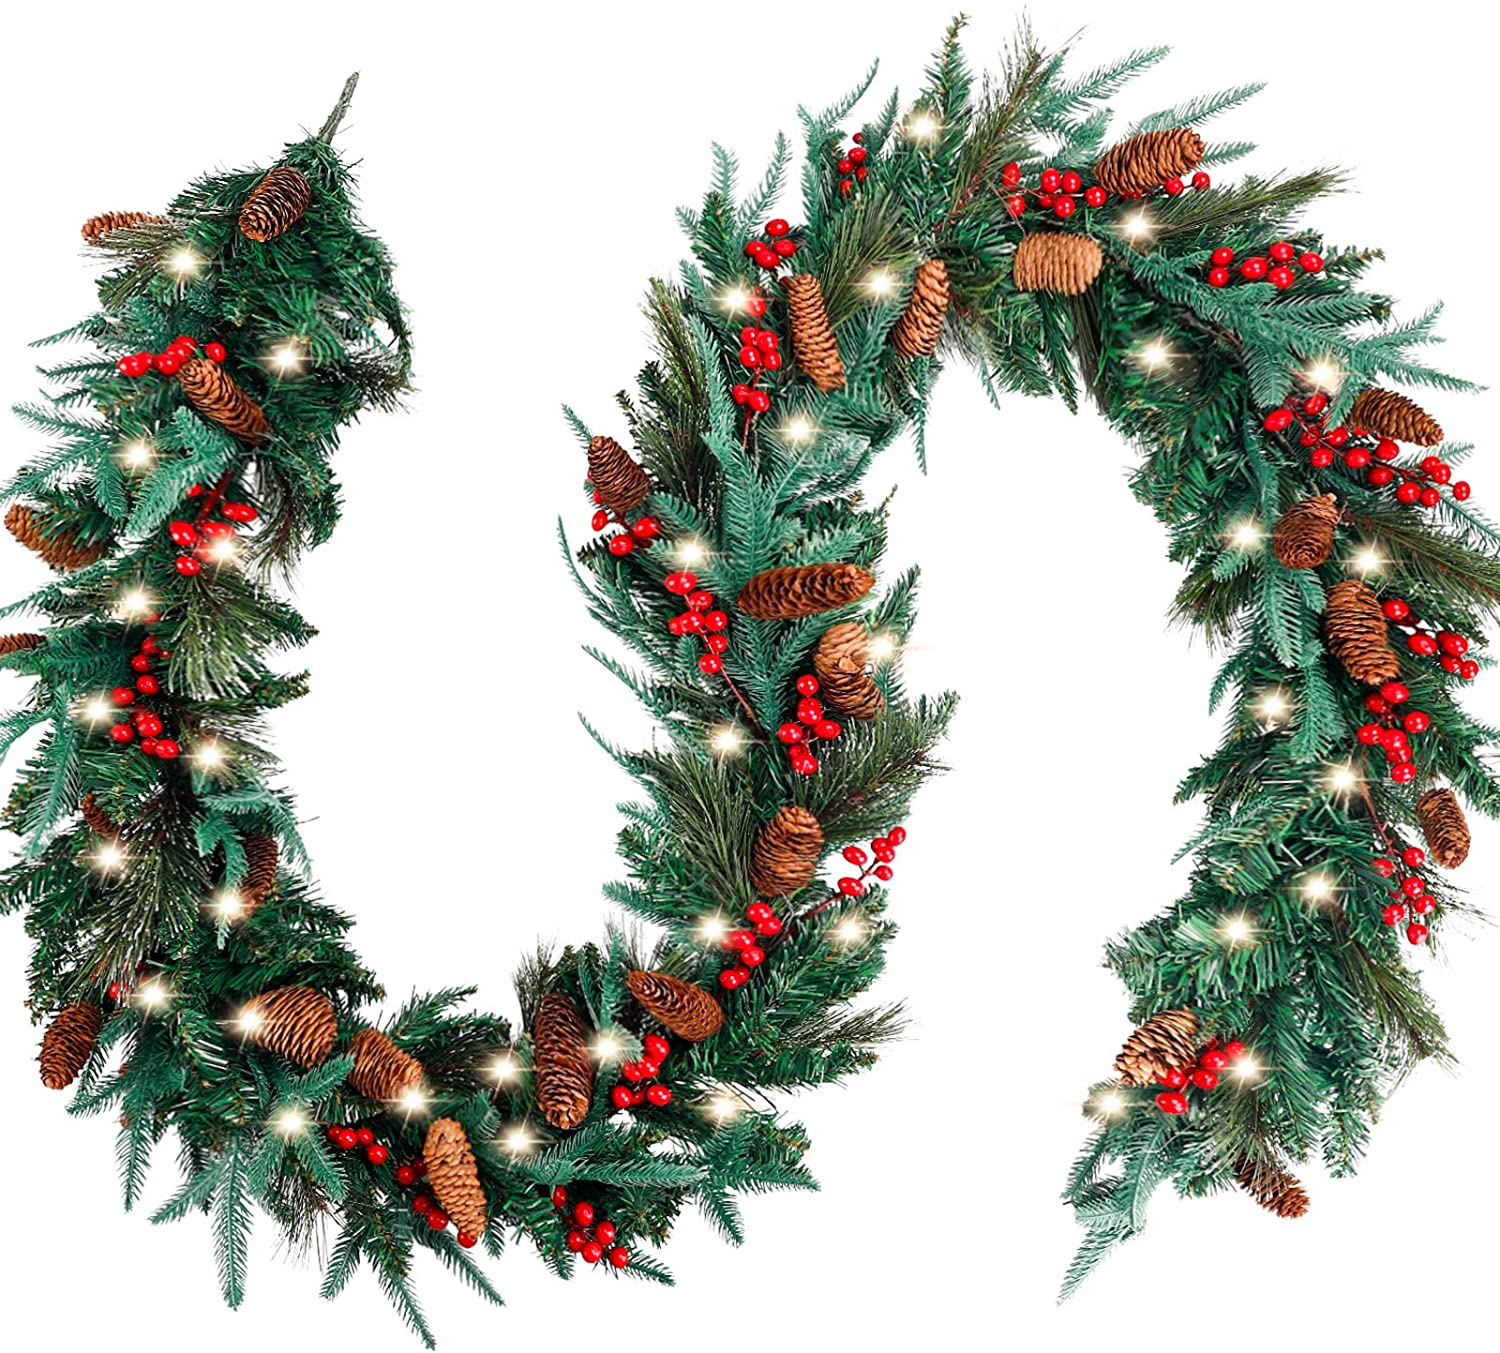 FUNARTY 9 Feet by 12 Inch Christmas Garland for Mantle with 50 Lights Un-prelit Garlands for Christmas with Pinecones Red Berries for Winter Holiday Home Decor 